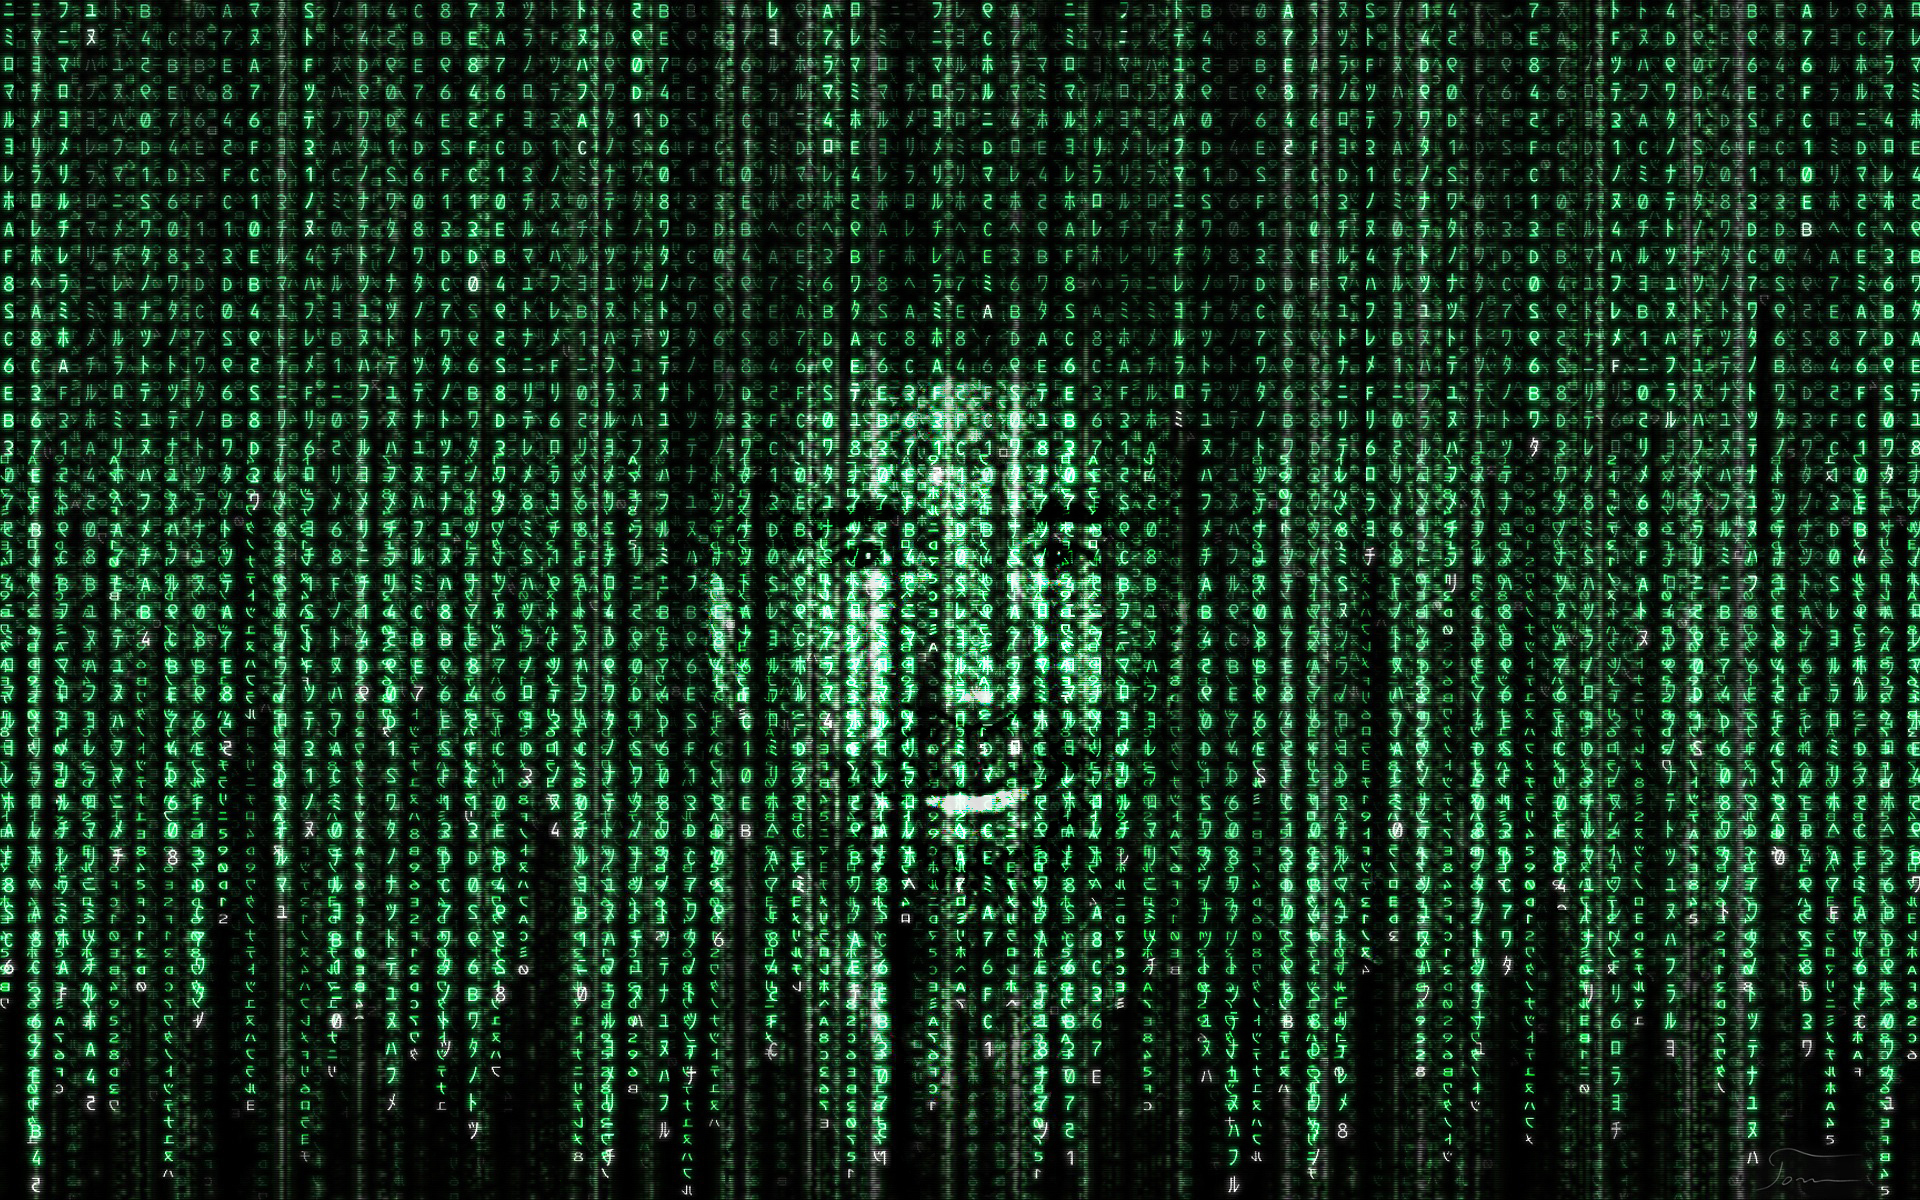 Chuck Norris In Matrix Code By Tomhotovy